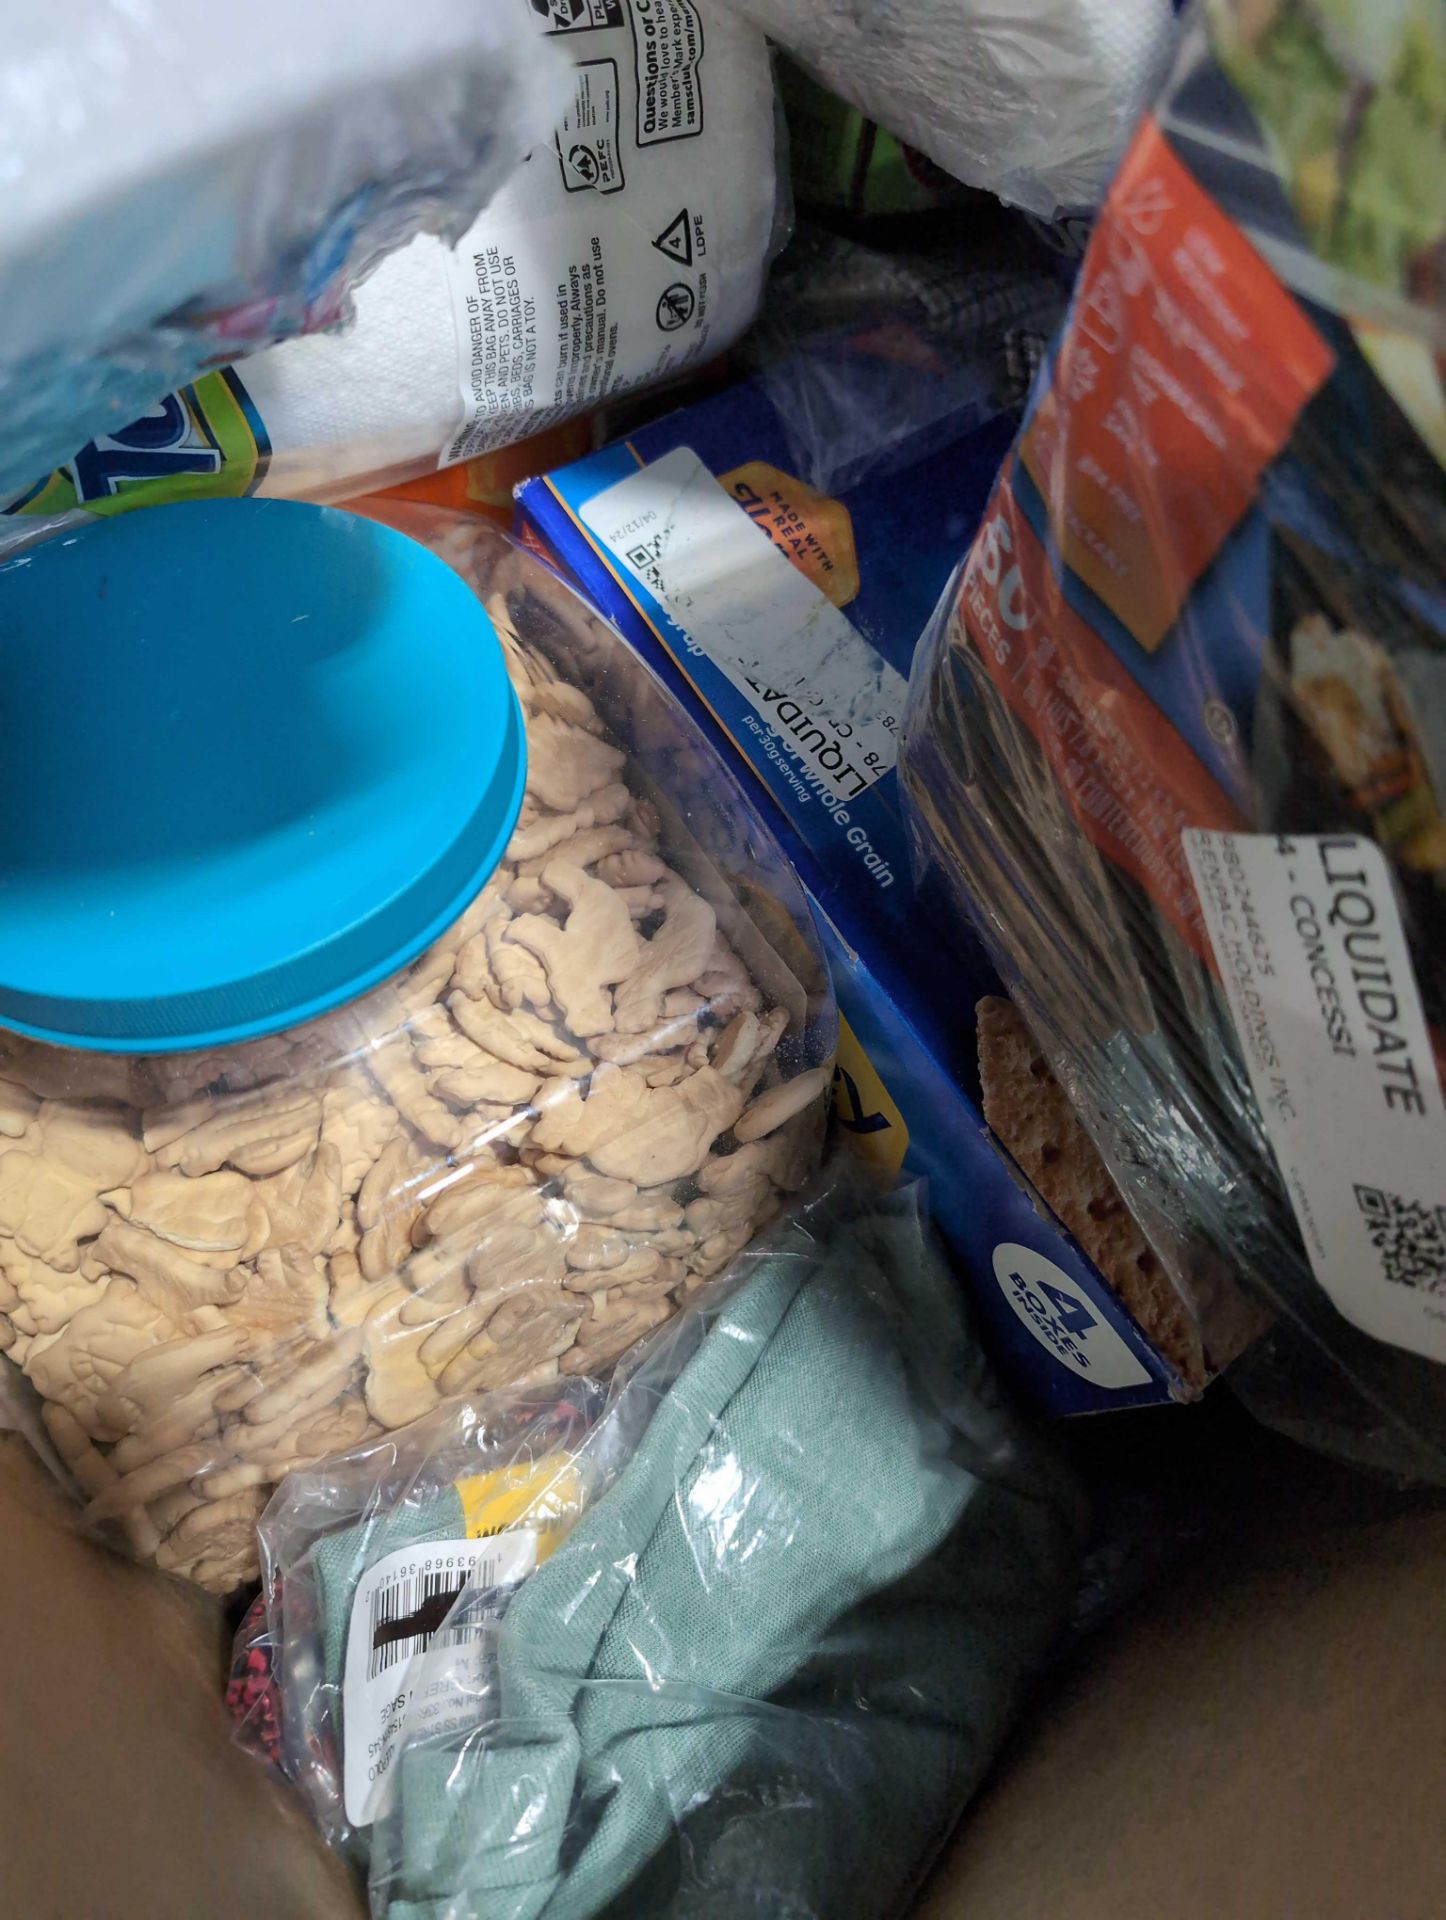 Big box store in a box: Toilet Paper, food containers, Towels, laundry detergent, nacho cheese sauce - Image 11 of 12